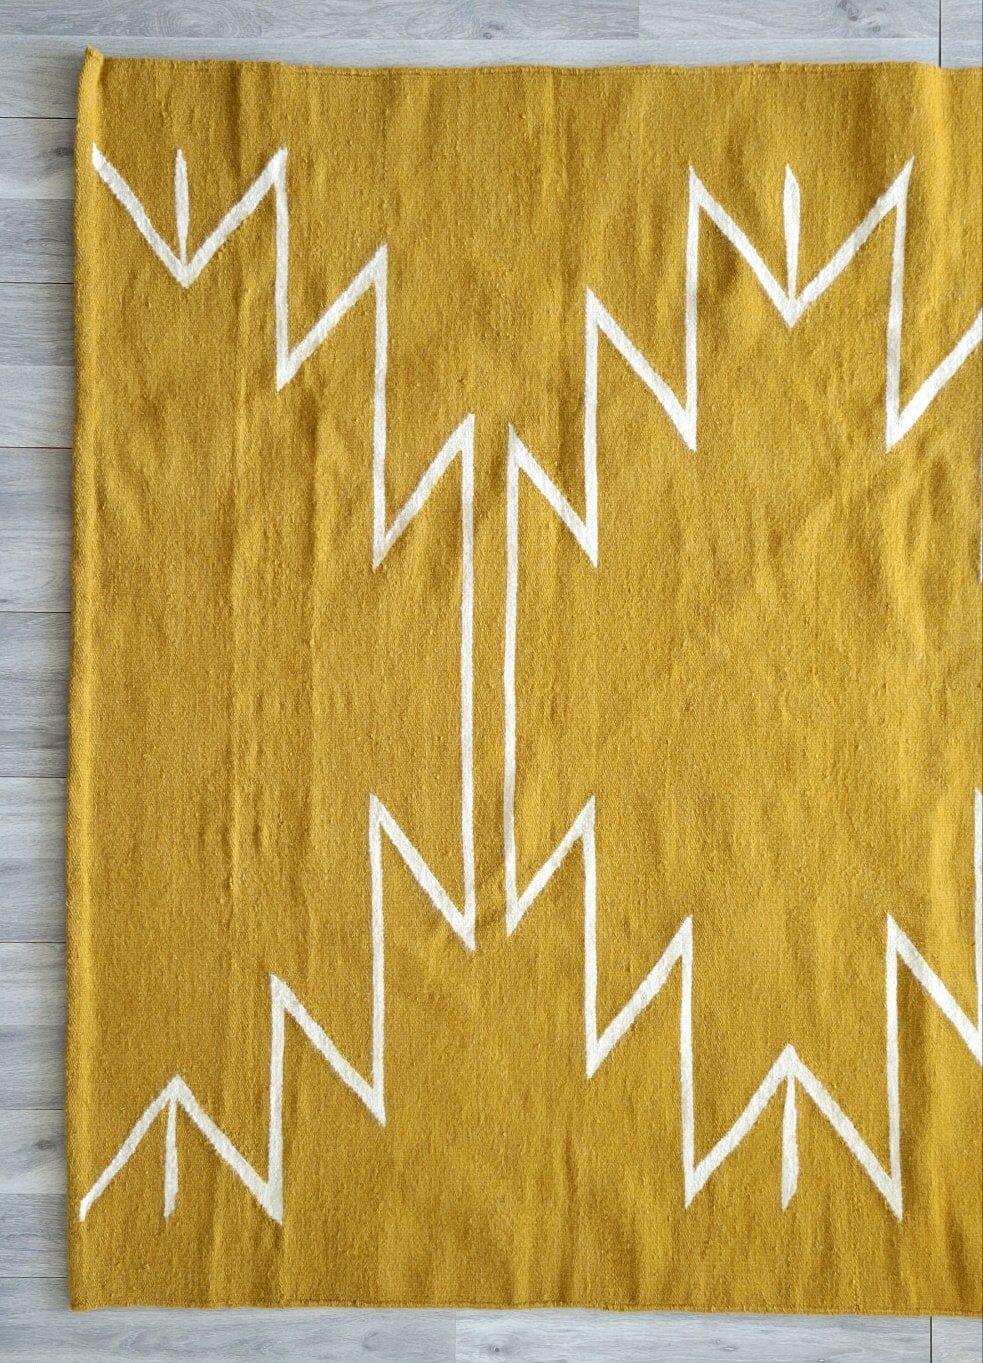 Product Information:
Made of natural wool
Colours: Mustard Yellow, Cream
Designed in Canada 
Handmade in Egypt 
A pad is recommended to prevent slipping



